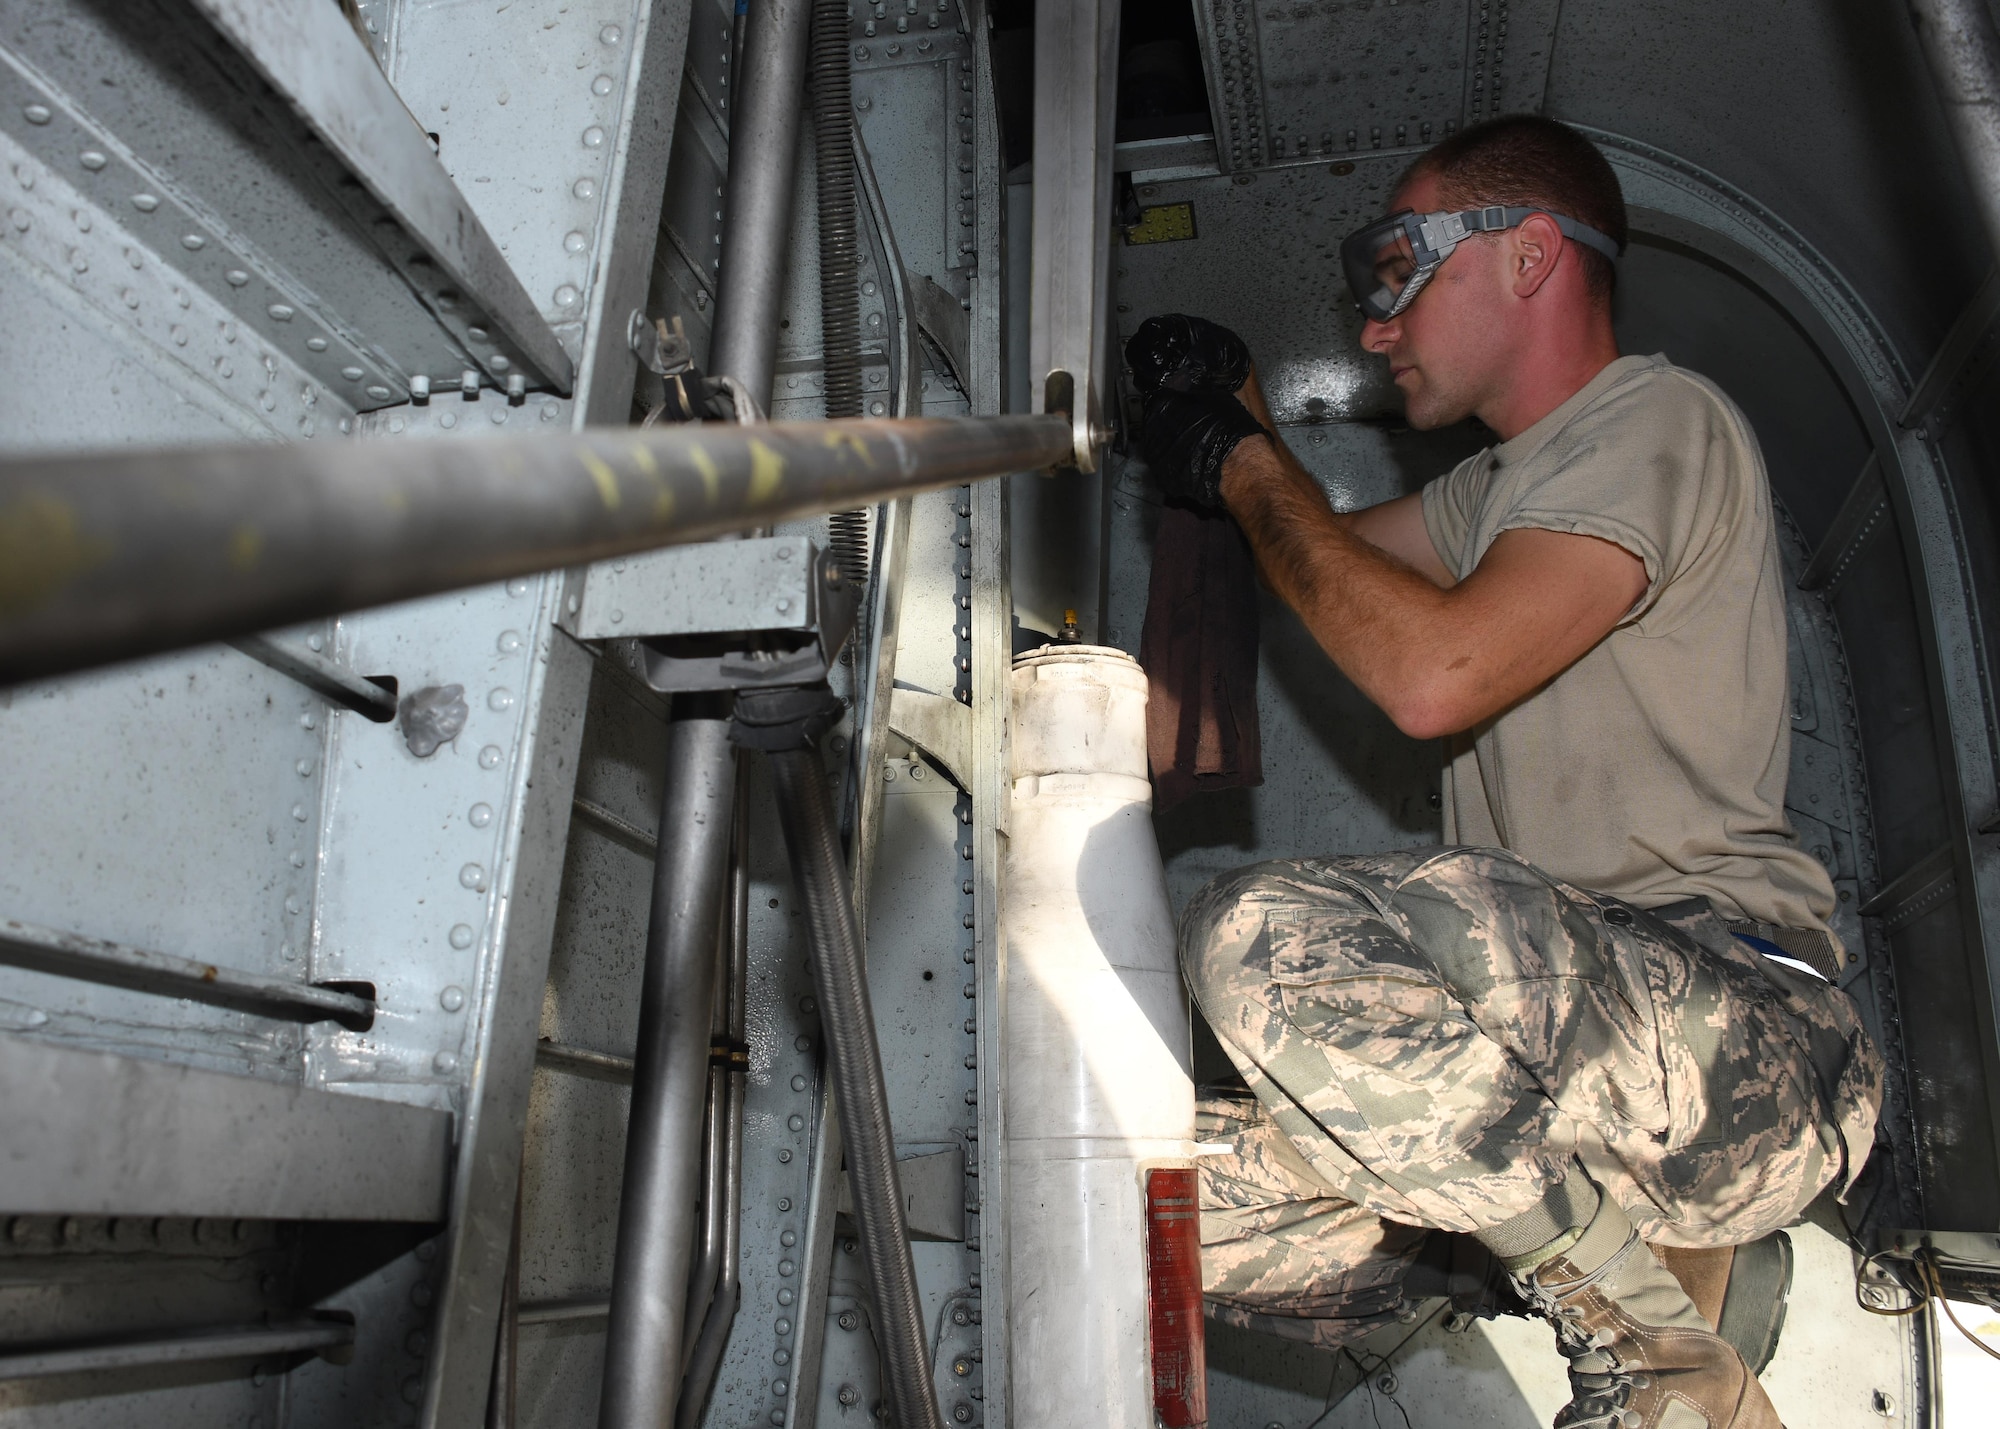 U.S. Air Force Staff Sgt. James Swann, a crew chief with the 379th Expeditionary Aircraft Maintenance Squadron, 746th Expeditionary Aircraft Maintenance Unit, applies lubricant to the landing gear of a C-130 Hercules at Al Udeid Air Base, Qatar, Dec. 30, 2016. The landing gear on each C-130 is lubricated every 15 days due to frequent use. (U.S. Air Force photo by Senior Airman Miles Wilson)